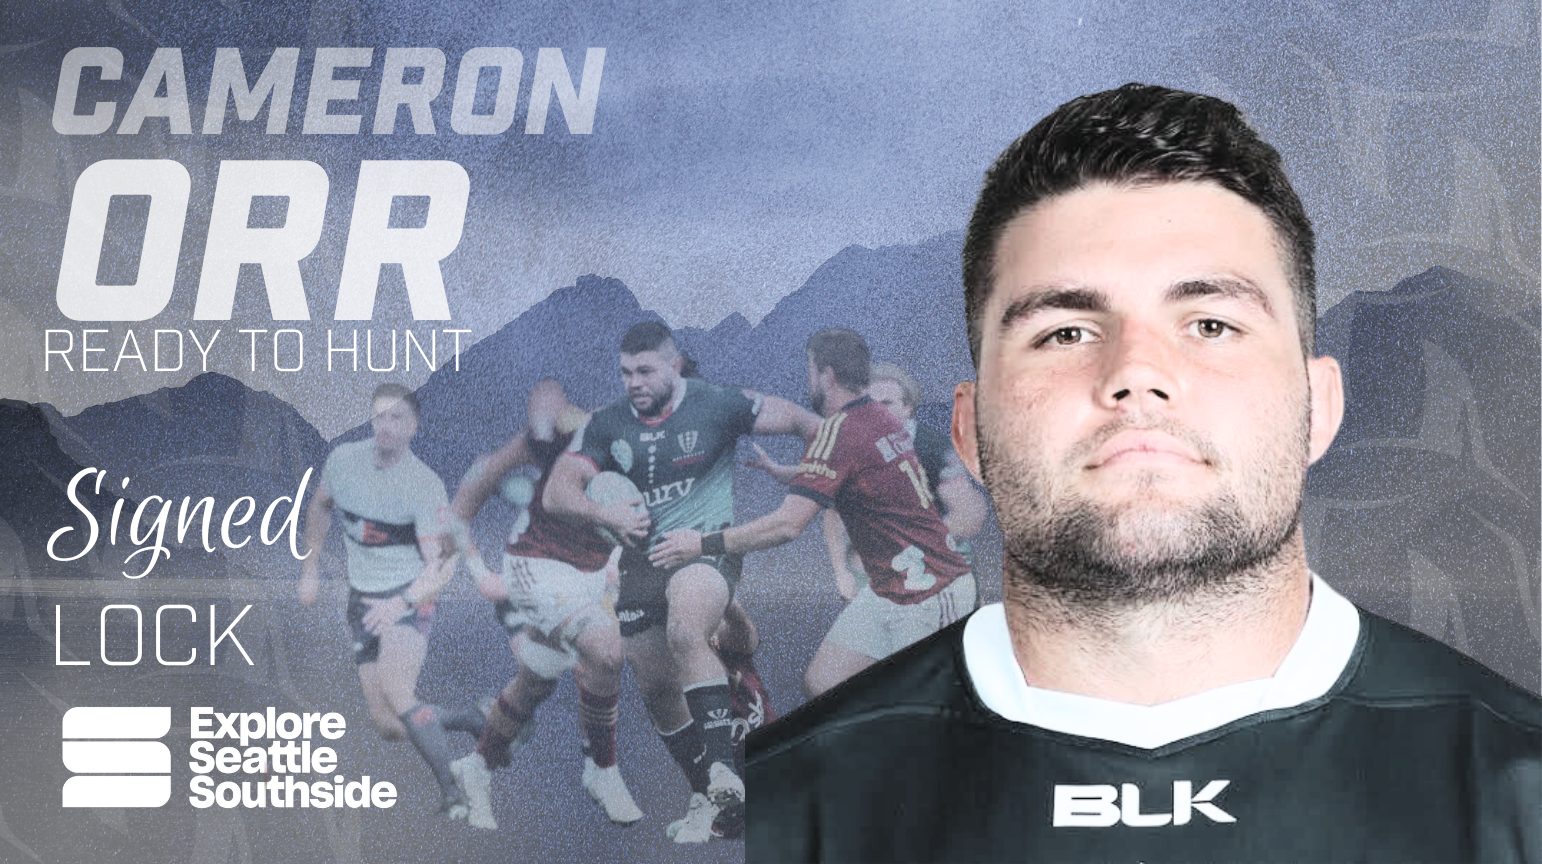 SEATTLE SEAWOLVES WELCOME CAMERON ORR TO THE FRONT ROW